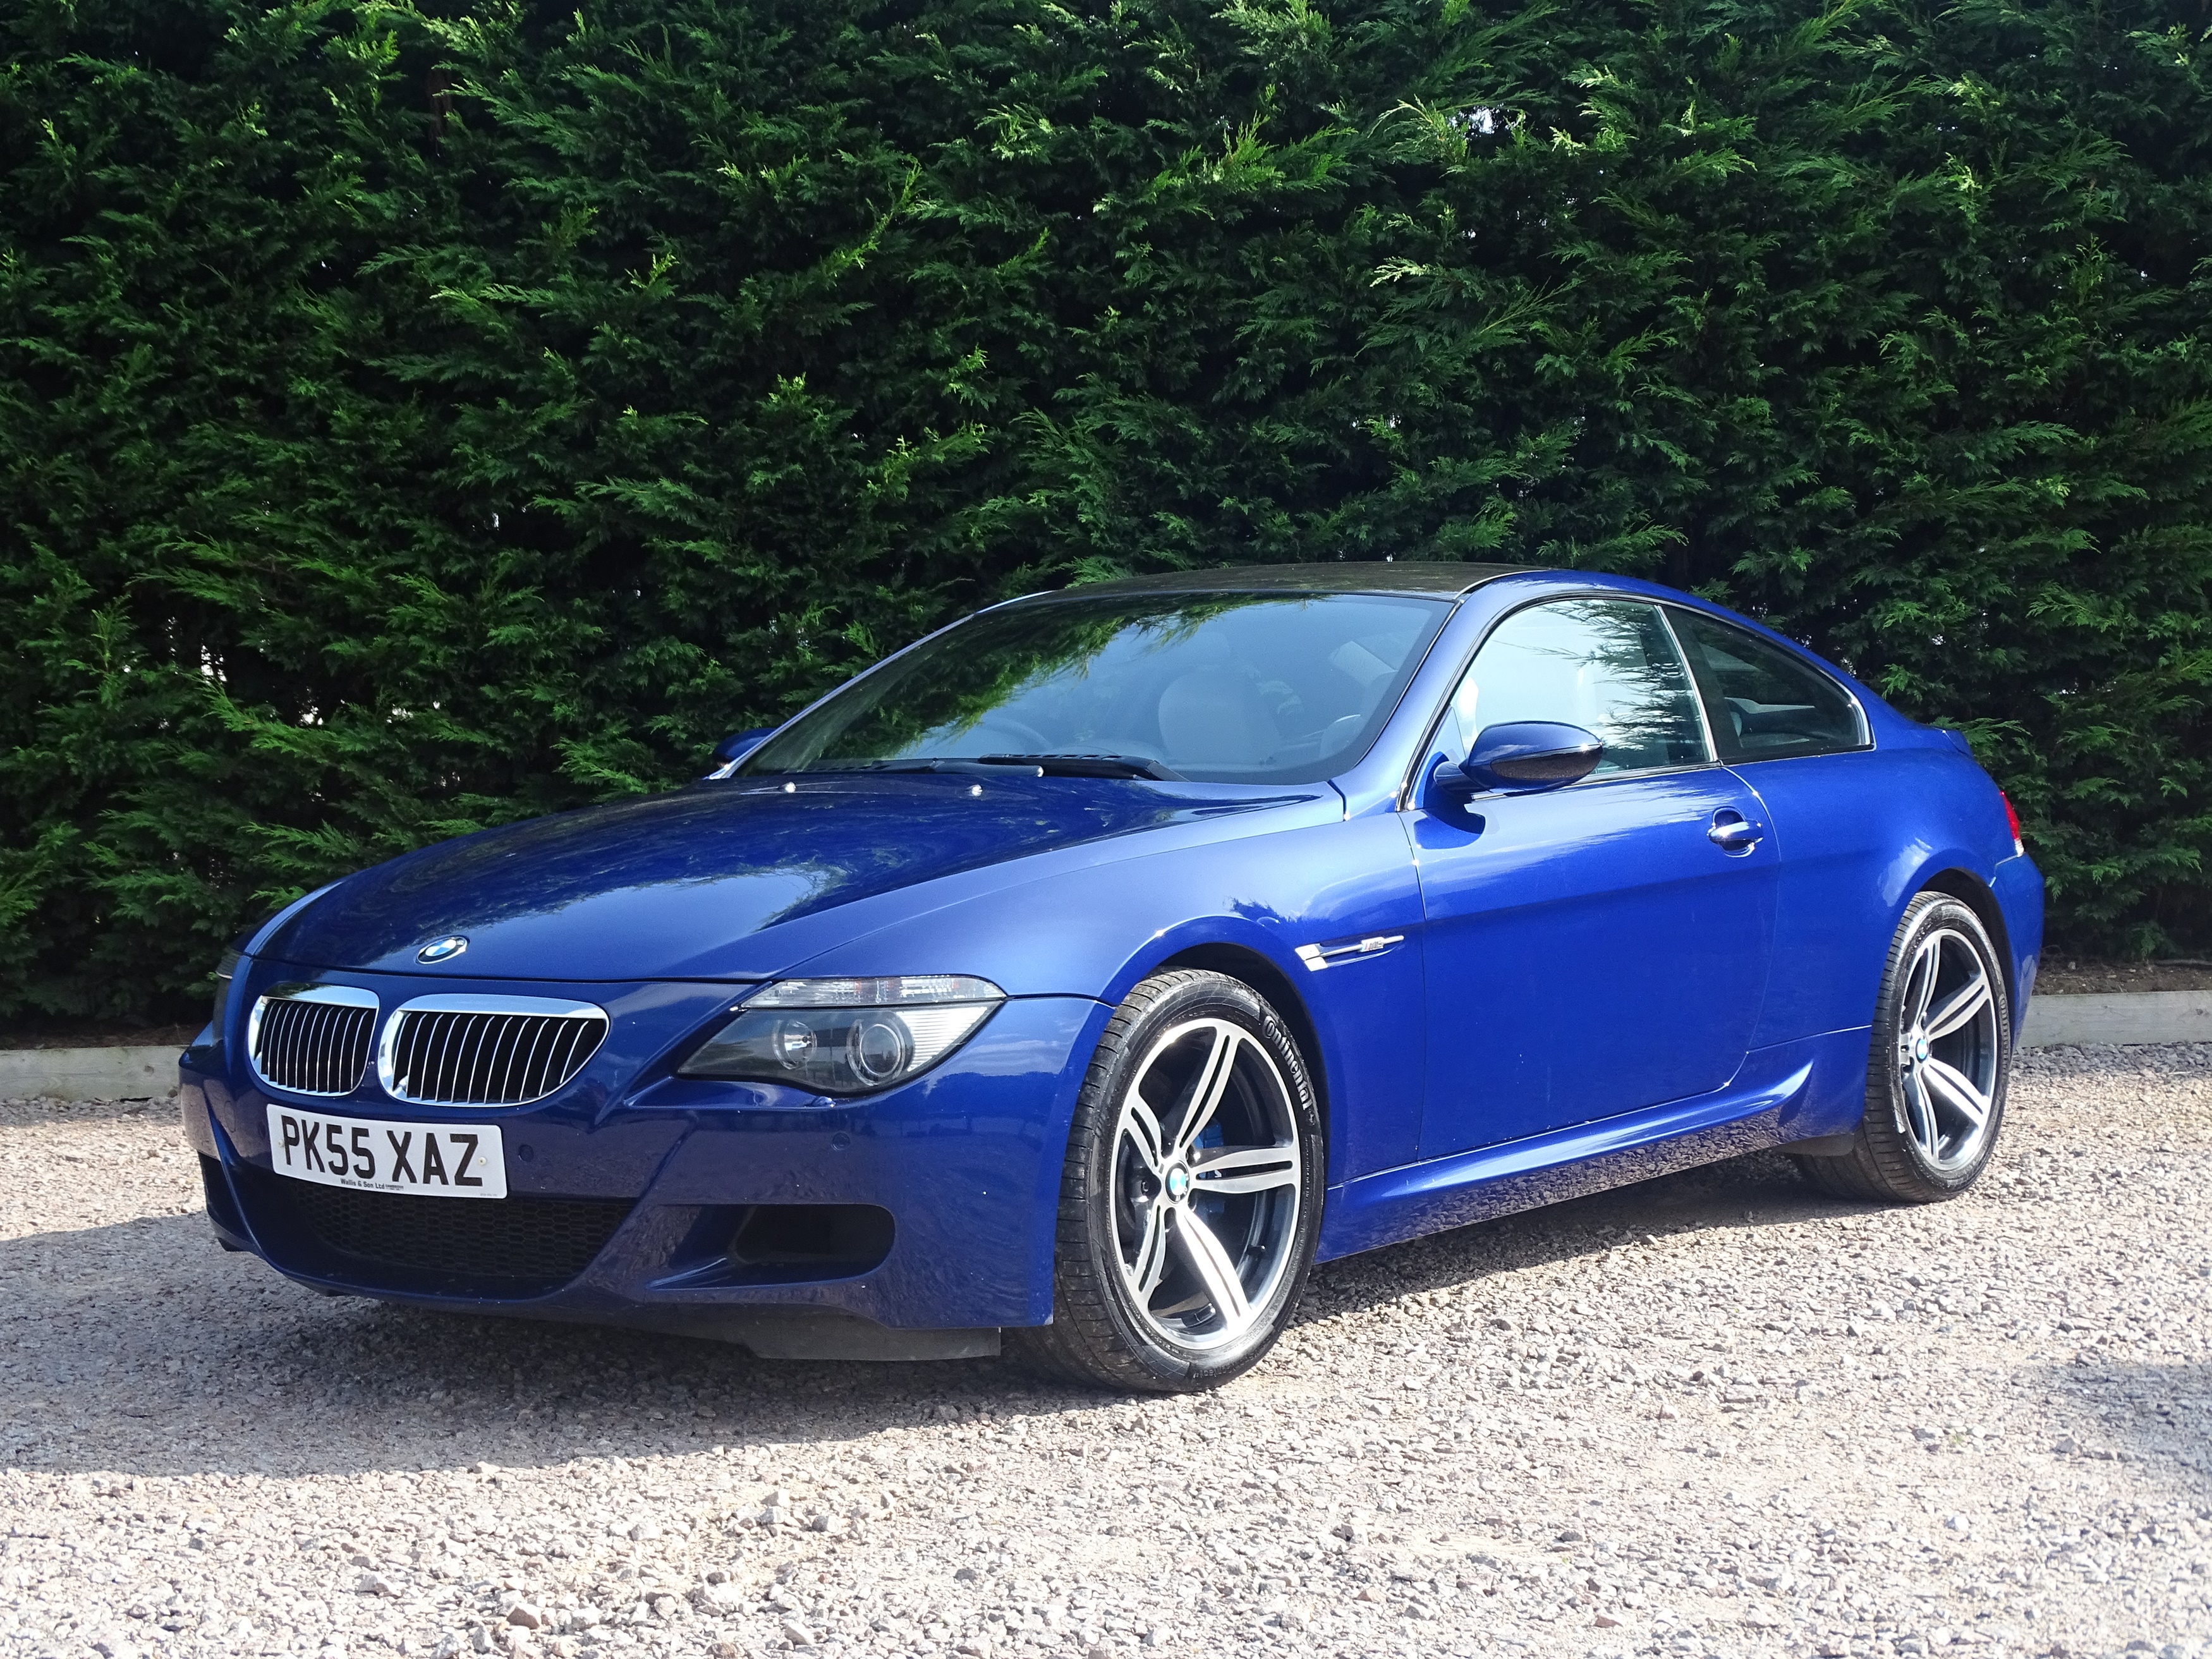 2005 BMW (E60) M5 for sale by auction in Chester, Cheshire, United Kingdom